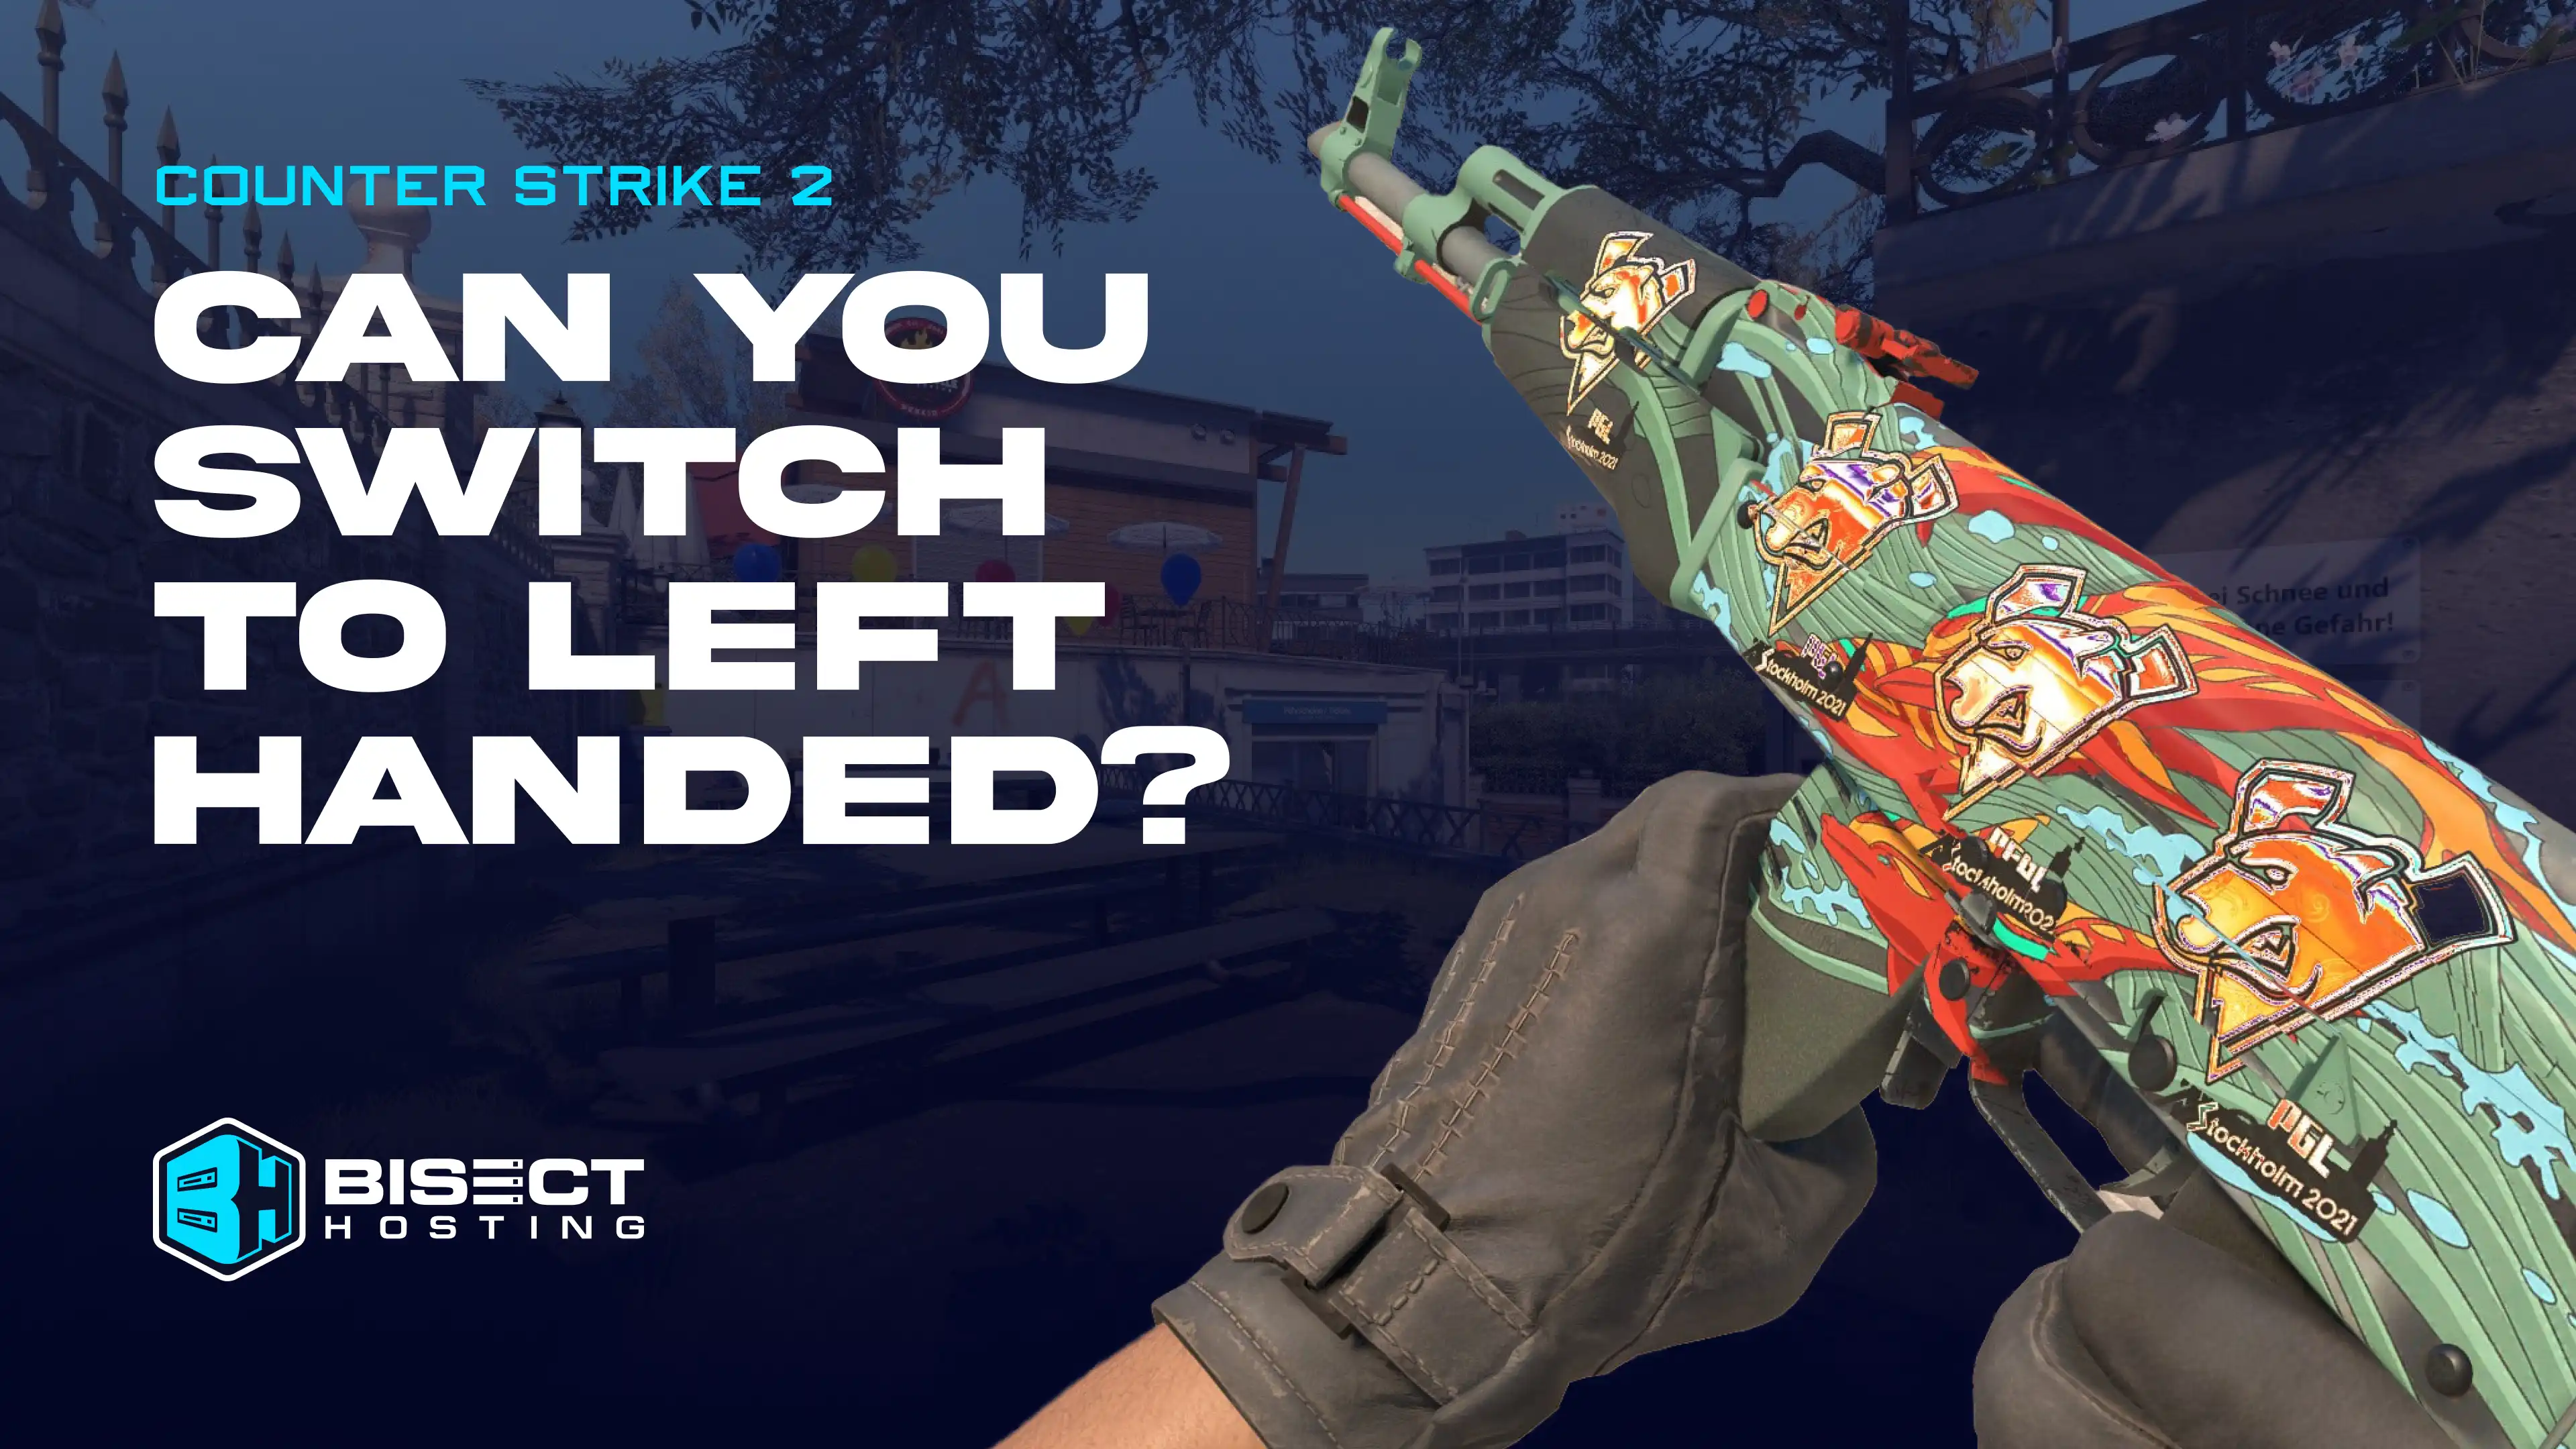 Can You Switch to Left Handed in Counter Strike 2?